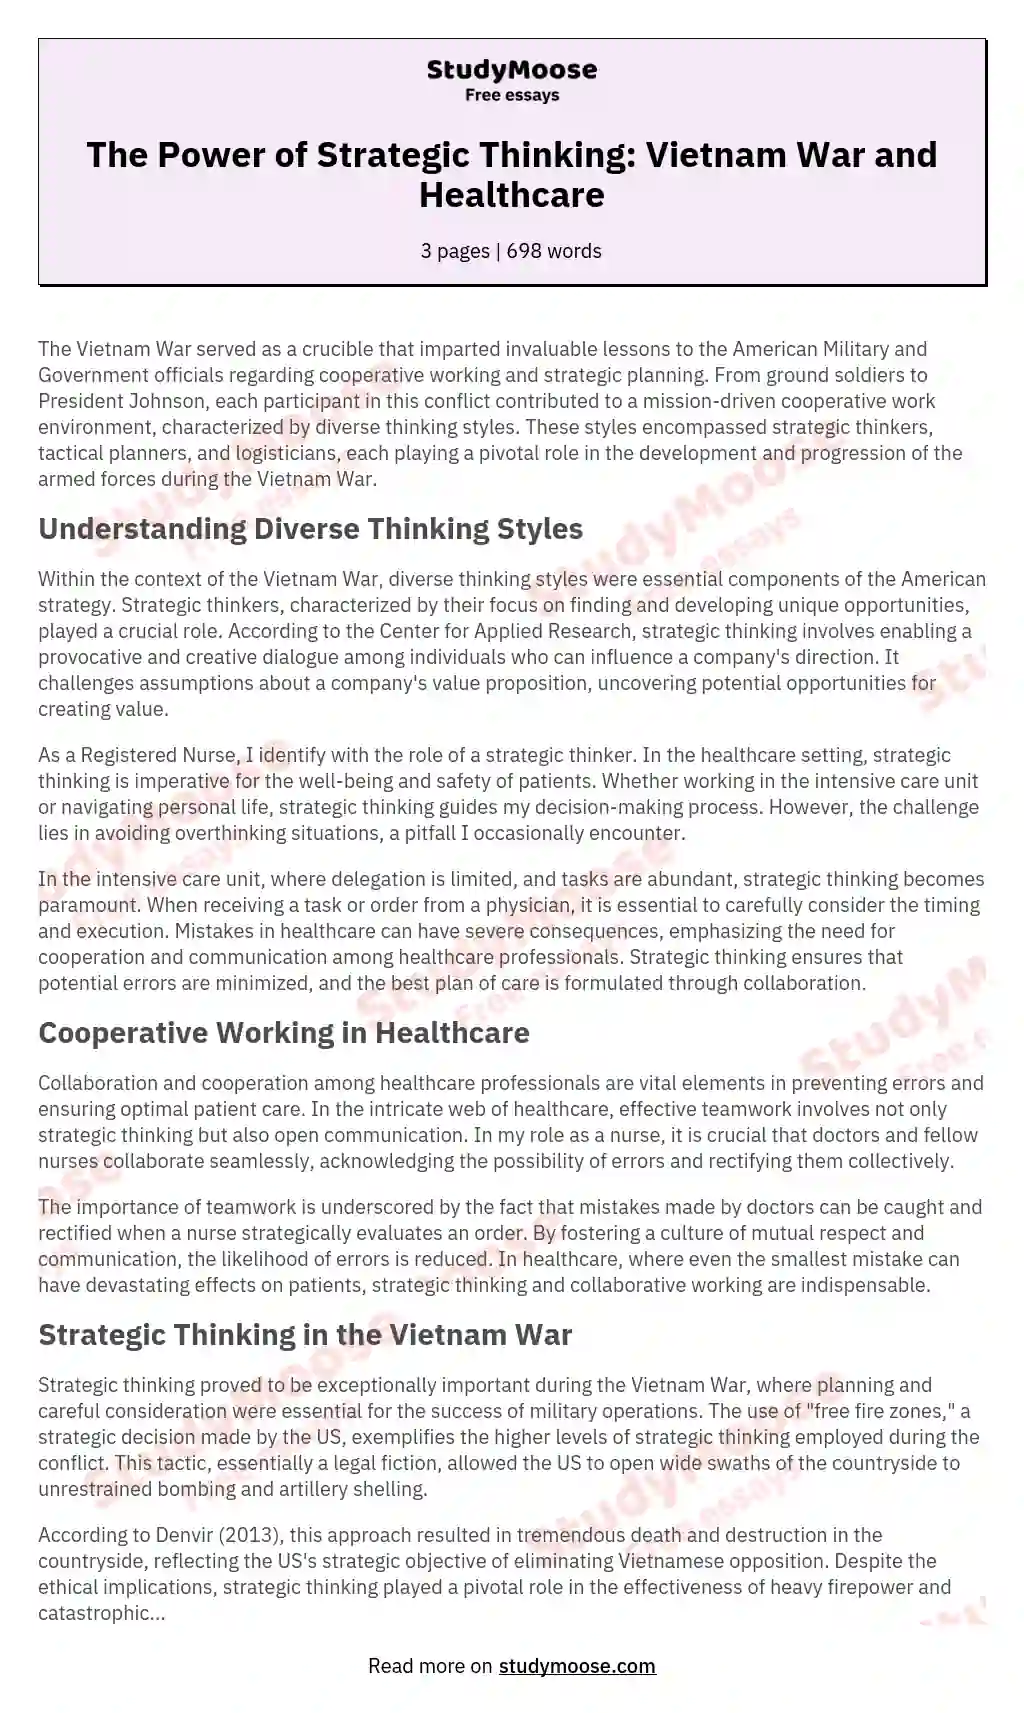 The Power of Strategic Thinking: Vietnam War and Healthcare essay